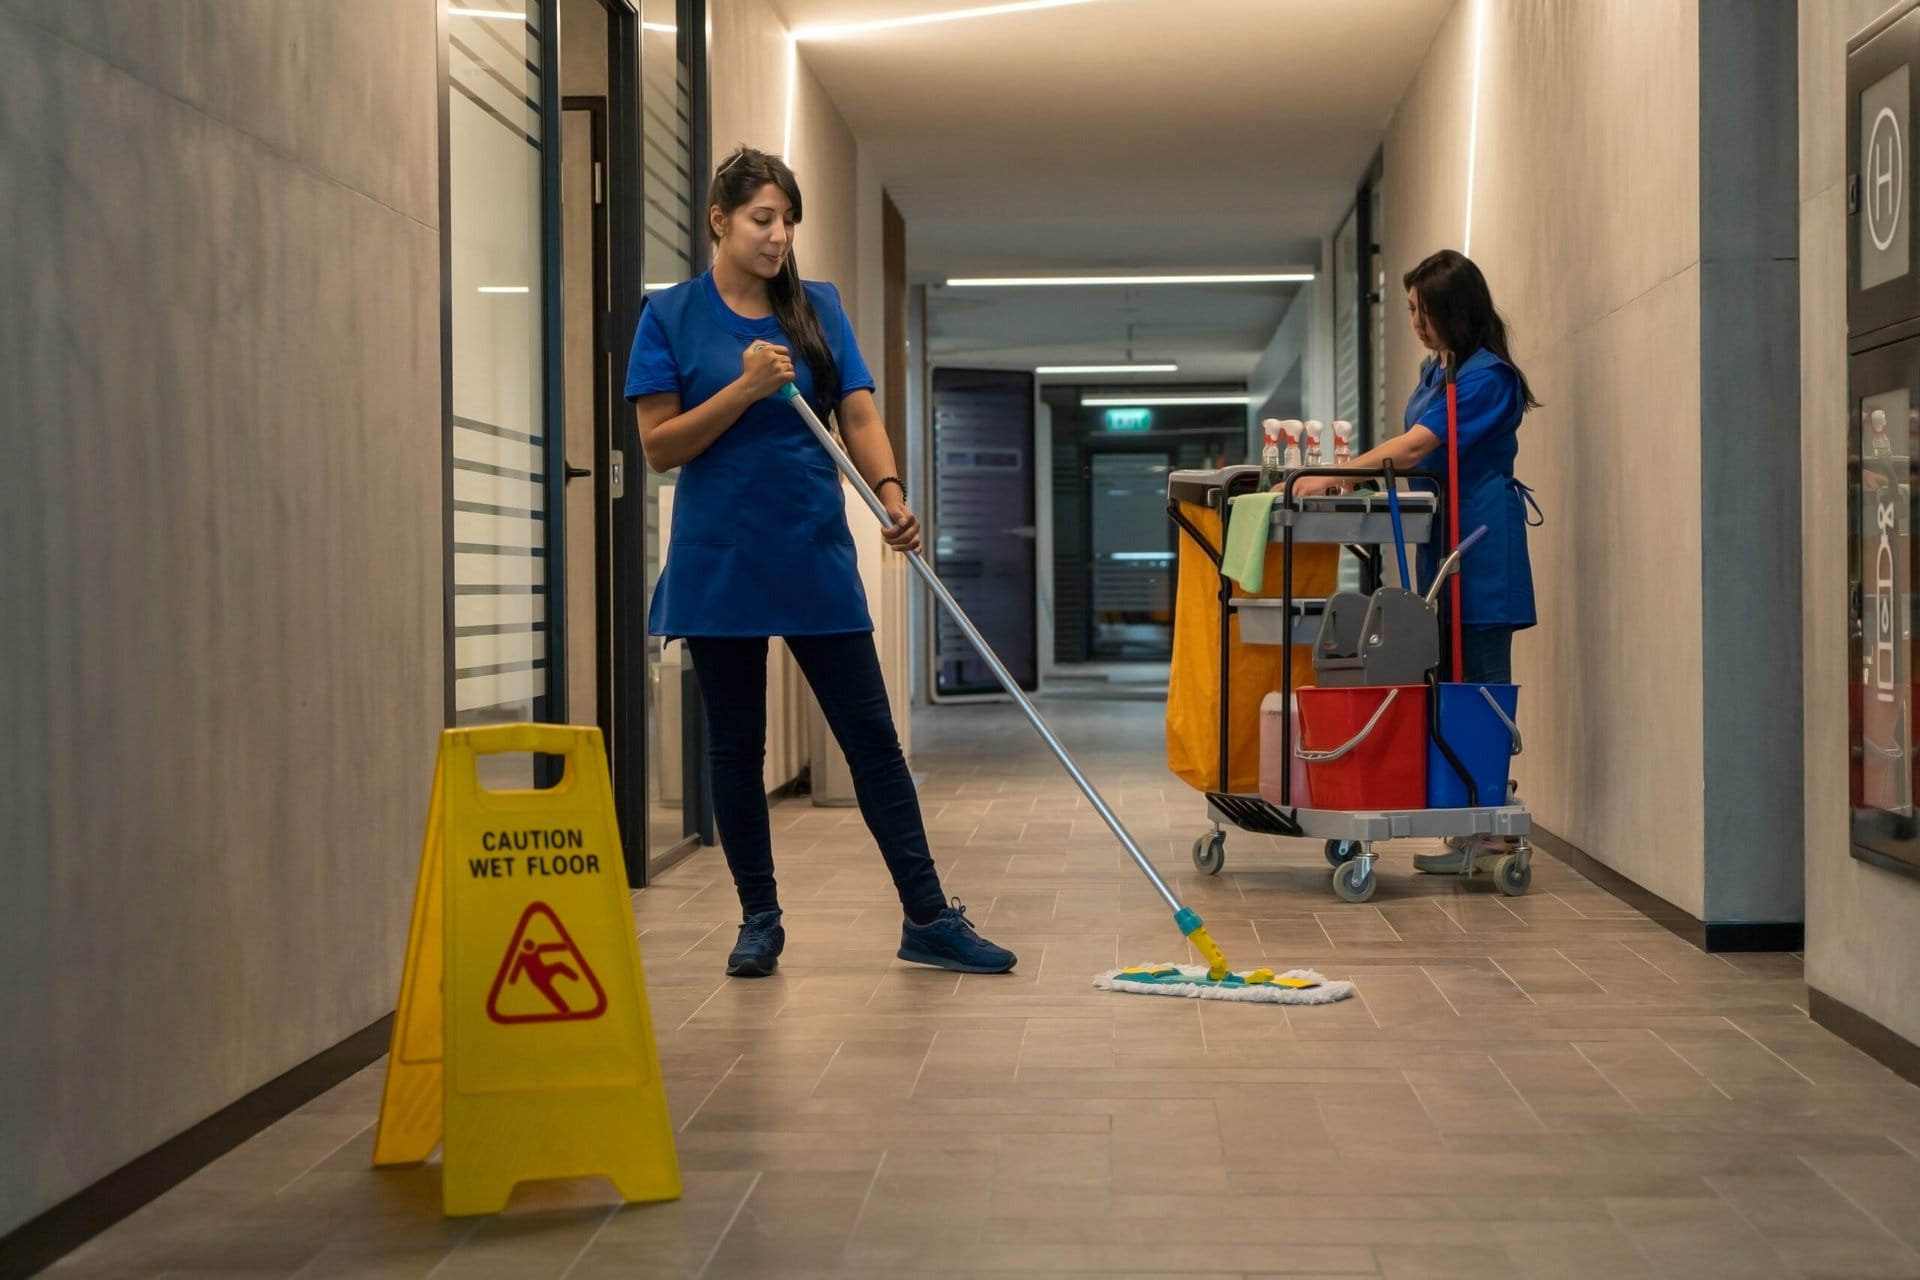 Cleaner,Mops,The,Floor,While,The,Other,Prepares,The,Detergents